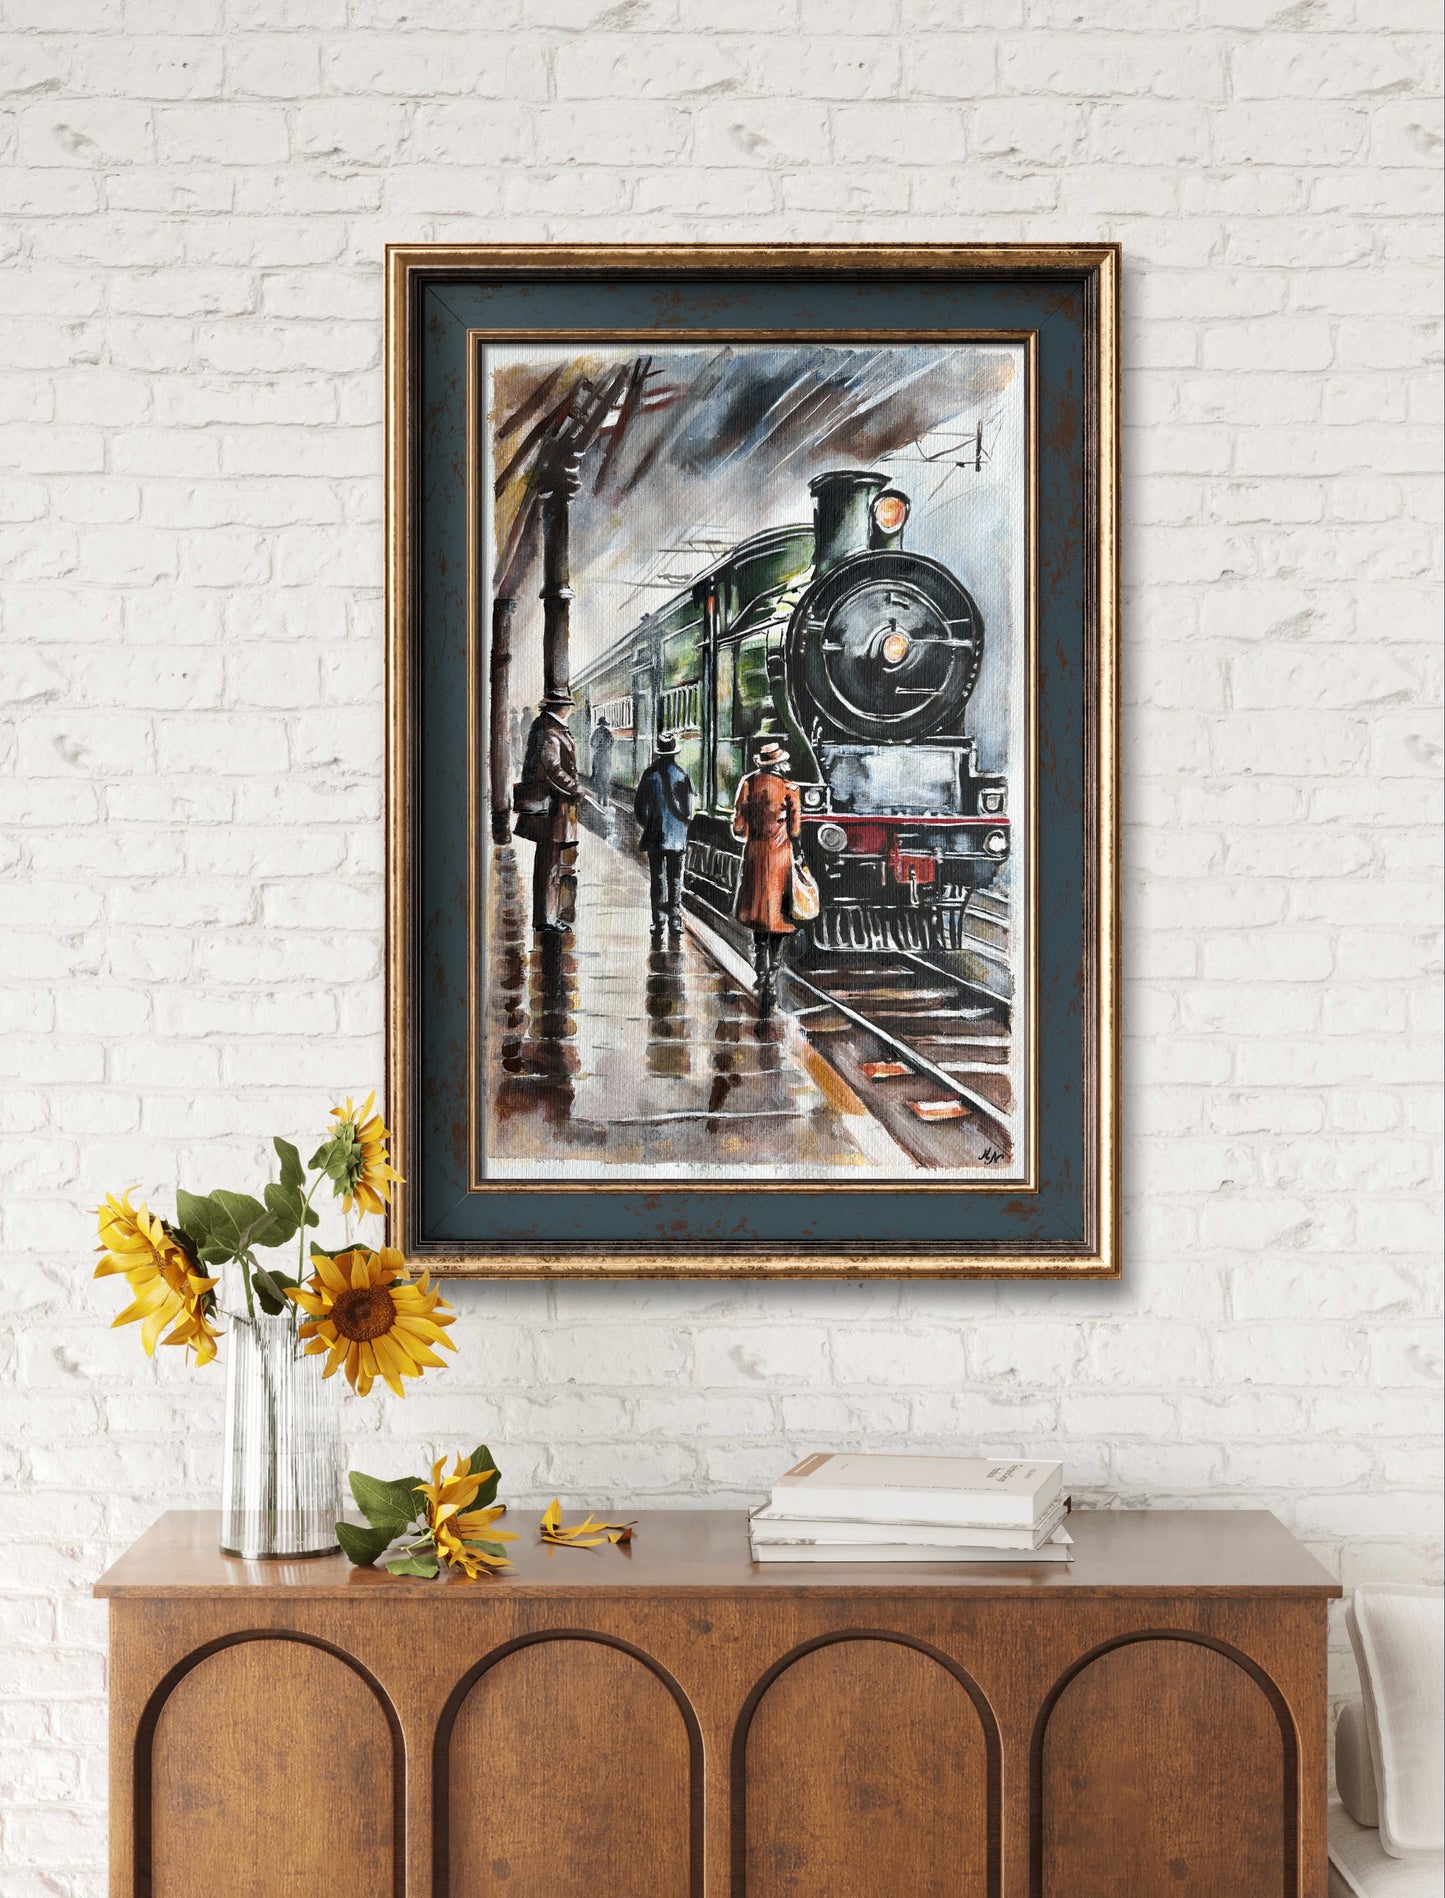 Experience the serenity of "Age of Steam," where the misty atmosphere and subdued hues evoke a sense of tranquility.